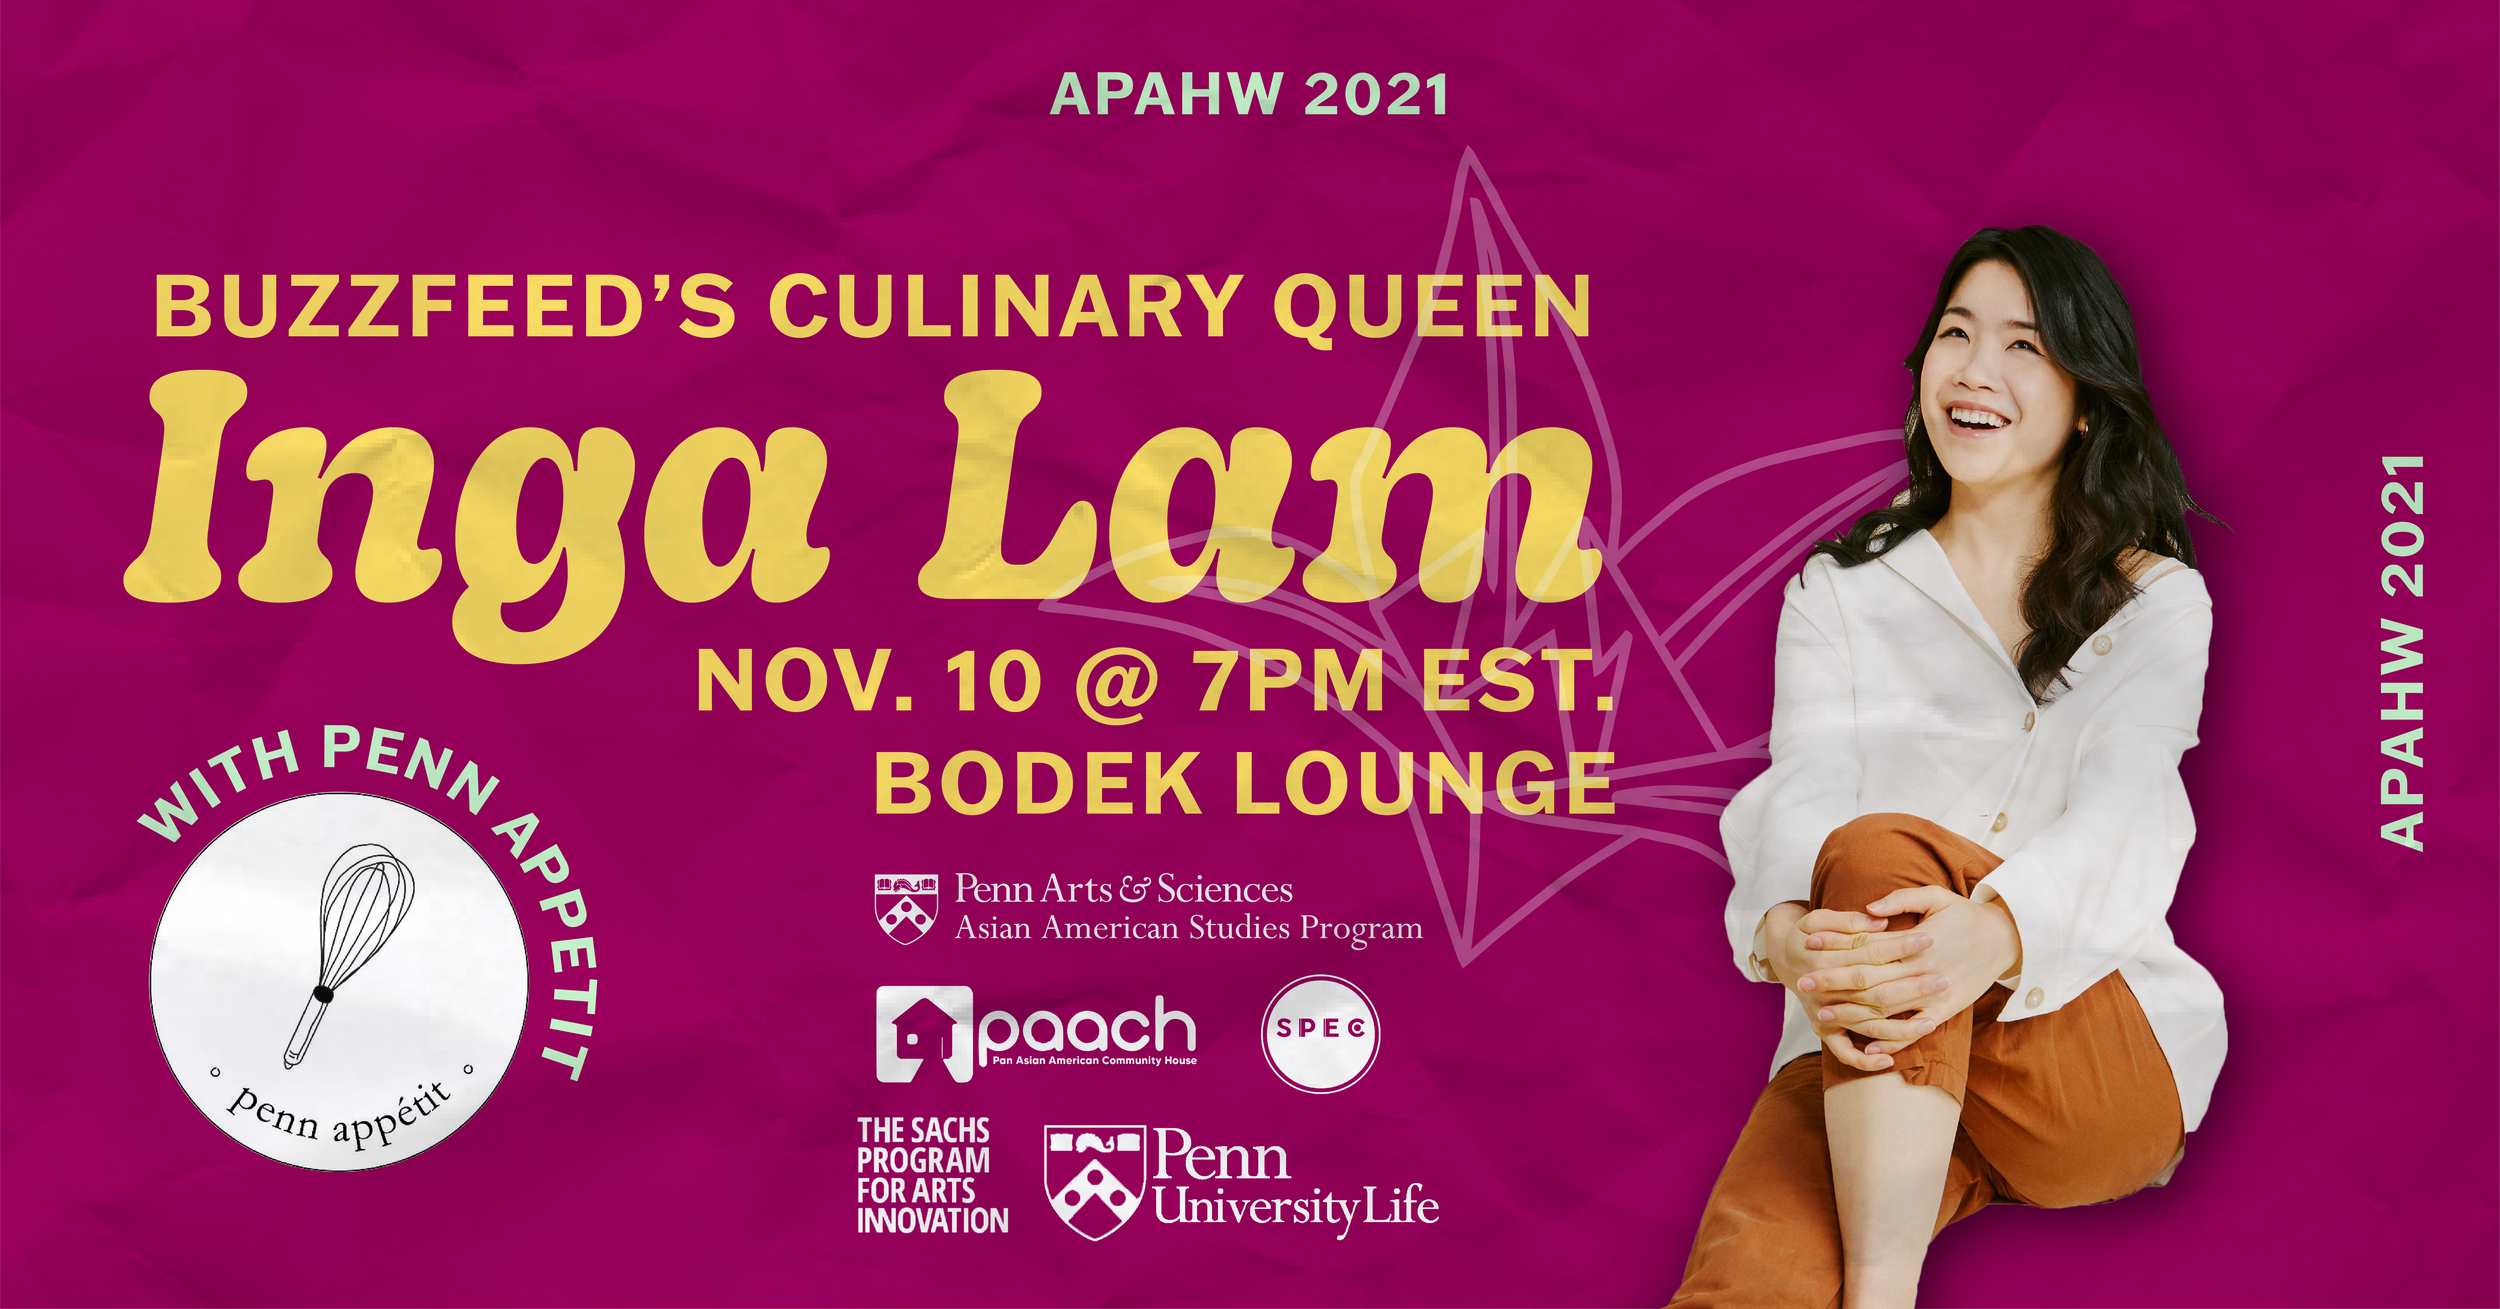 A pink banner has an image of a smiling woman and text that reads "BuzzFeed's culinary queen Inga Lam, Nov. 10 @ 7PM EST. Bodek Lounge